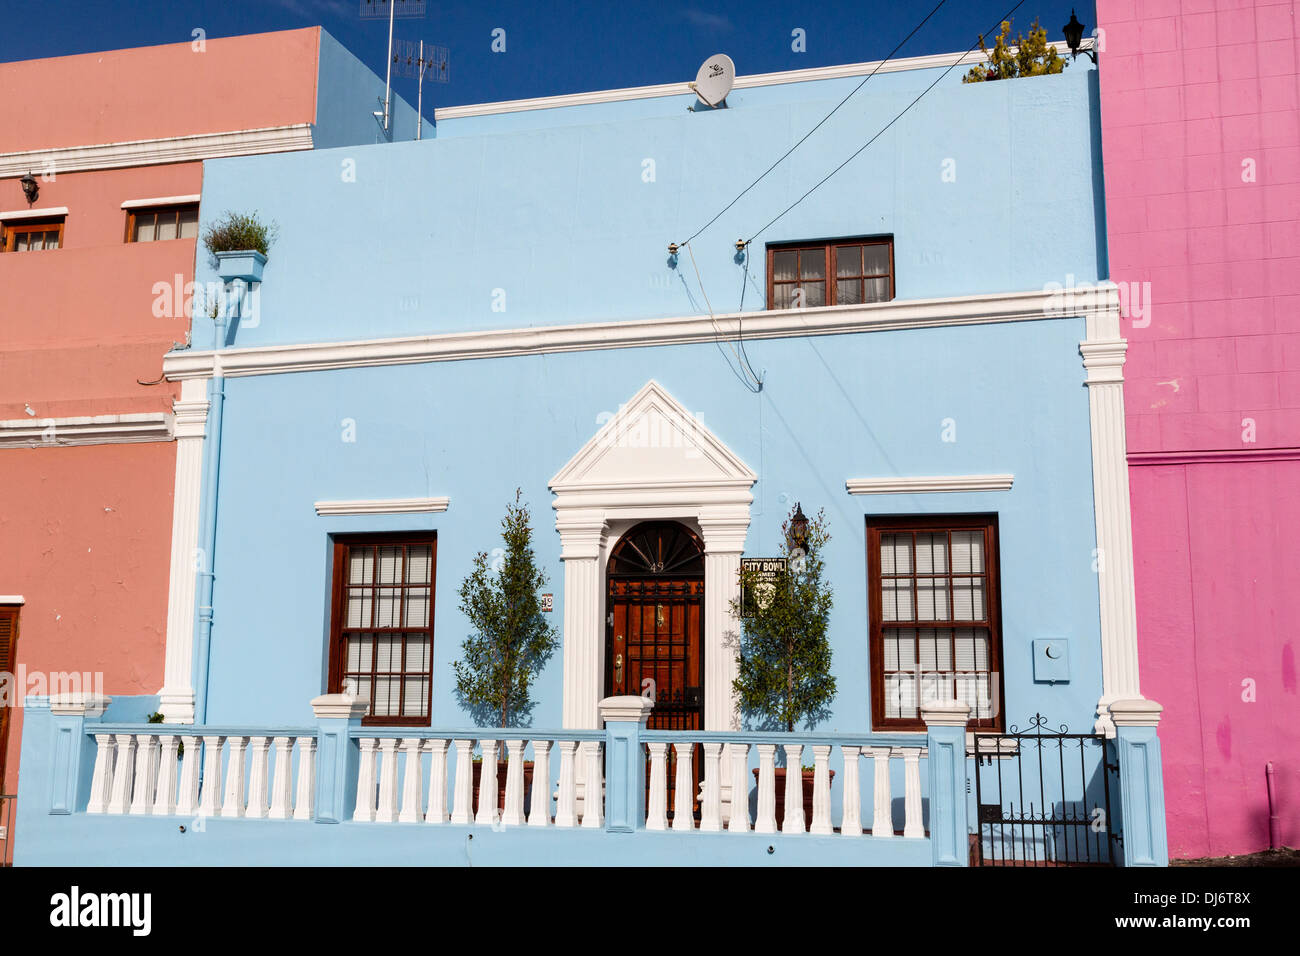 South Africa, Cape Town, Bo-kaap. Private House. Stock Photo